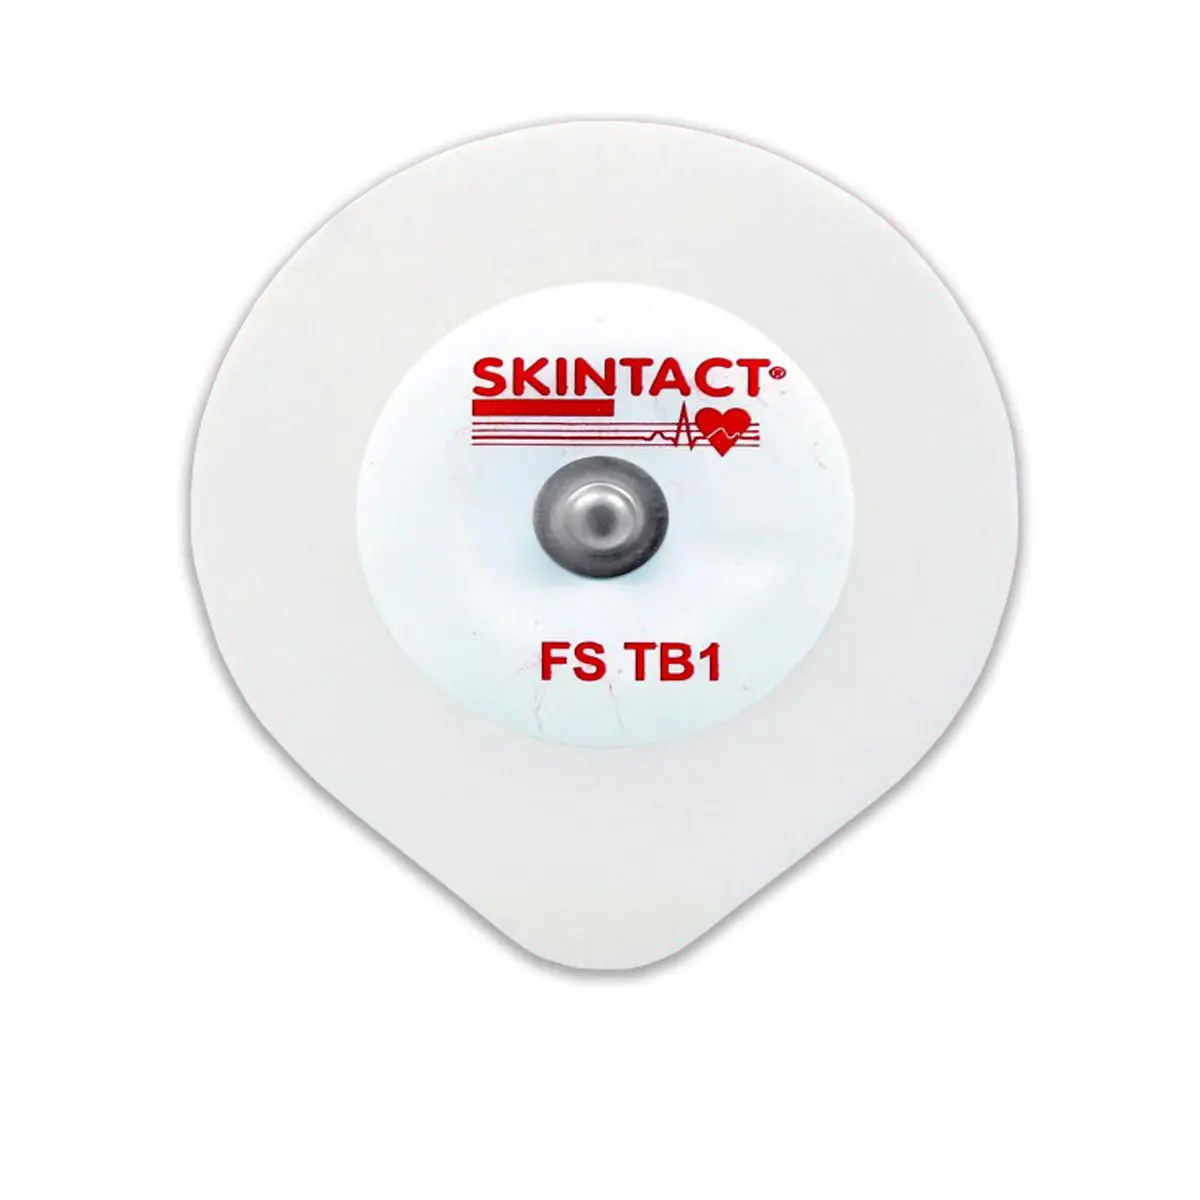 Skintact FSTB1 Foam Solid Gel Electrodes for Stress and General Monitoring. Box of 600 skintact foam electrodes, electrodes foam, white foam stress test, electrode stress, EDAN_ECG, 3M  2257, 2259, 2270, 2287, 3m, 1590, 1800, 1870, conmed, 200, 530, 7161, 9131, Kendall-LTP, 2010, Nikomed USA, A10005-1-60, Vermed, 